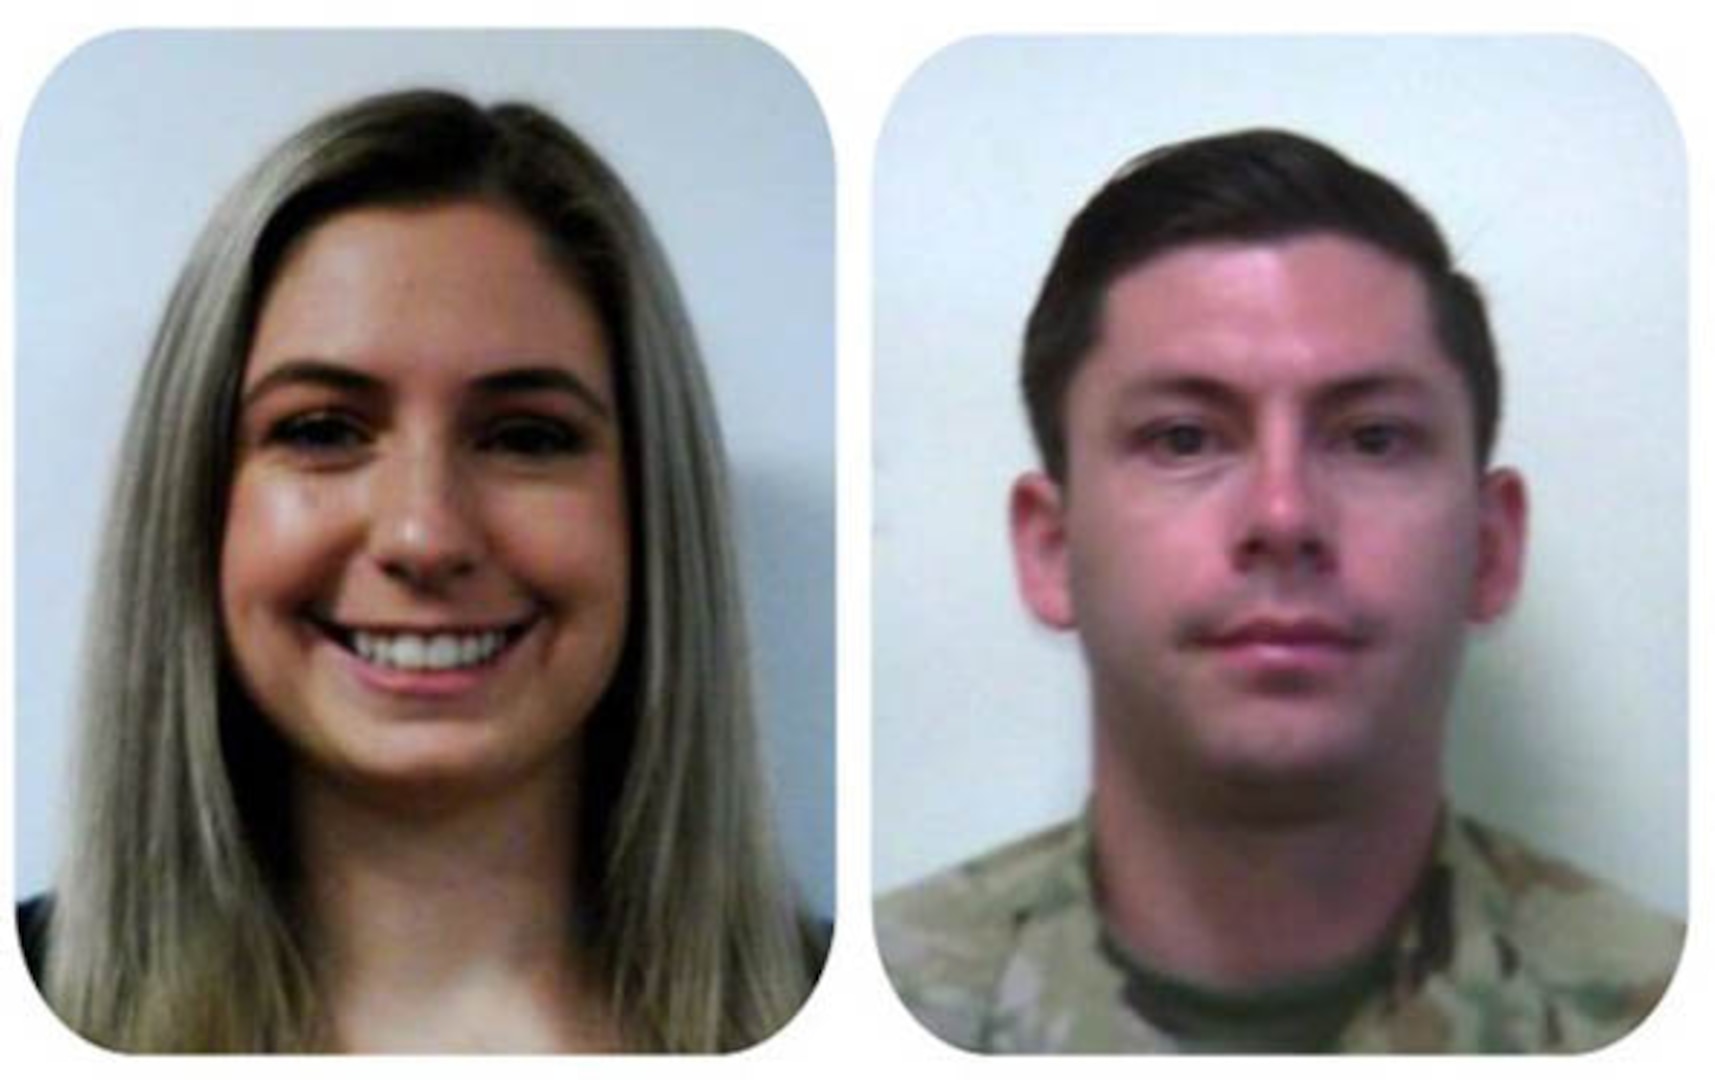 New York Army National Guard Chief Warrant Officer 2 Casey Frankoski, left, and Chief Warrant Officer 2 John Grassia were killed when a UH-72 Lakota helicopter they were flying crashed near Rio Grande City, Texas, March 8, 2024. The two were assigned to  Detachment 2, Company A, of the 1st Battalion, 244th Aviation Regiment, operating as part of Joint Task Force North, supporting Customs and Border Protection operations on the southwest border.